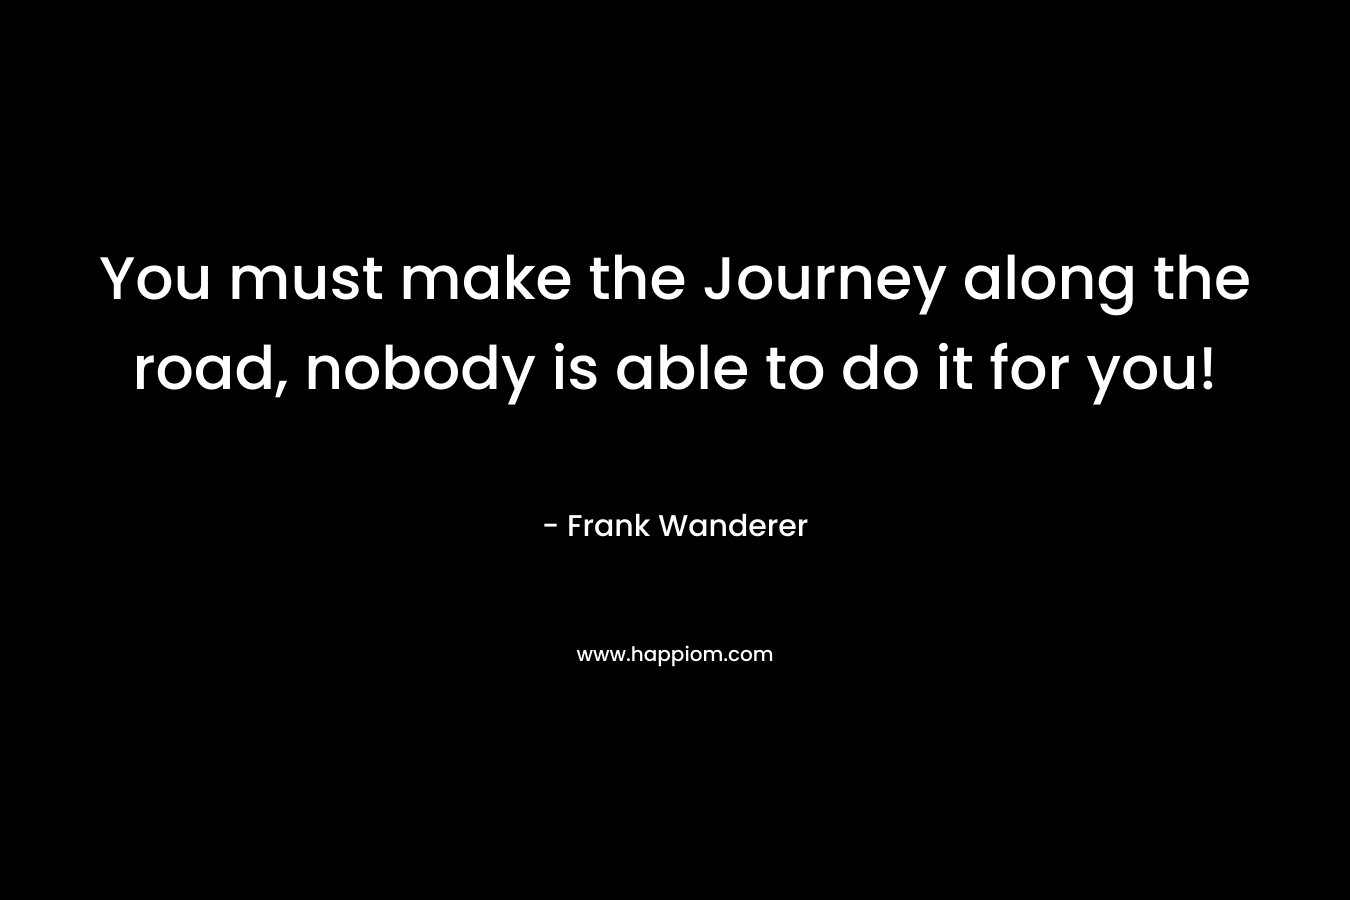 You must make the Journey along the road, nobody is able to do it for you!